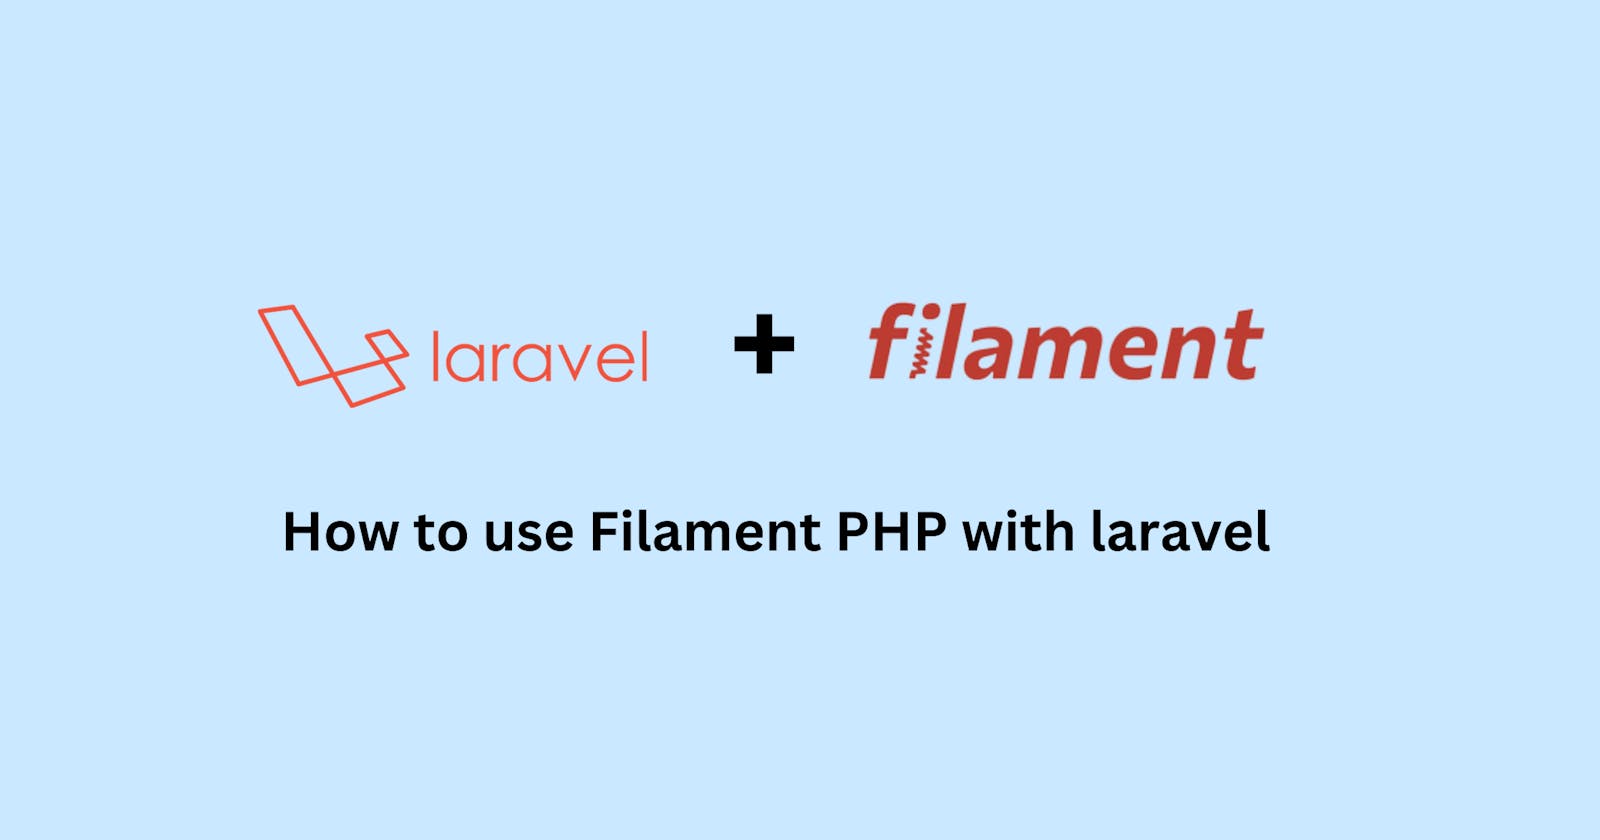 How to use Filament PHP with laravel